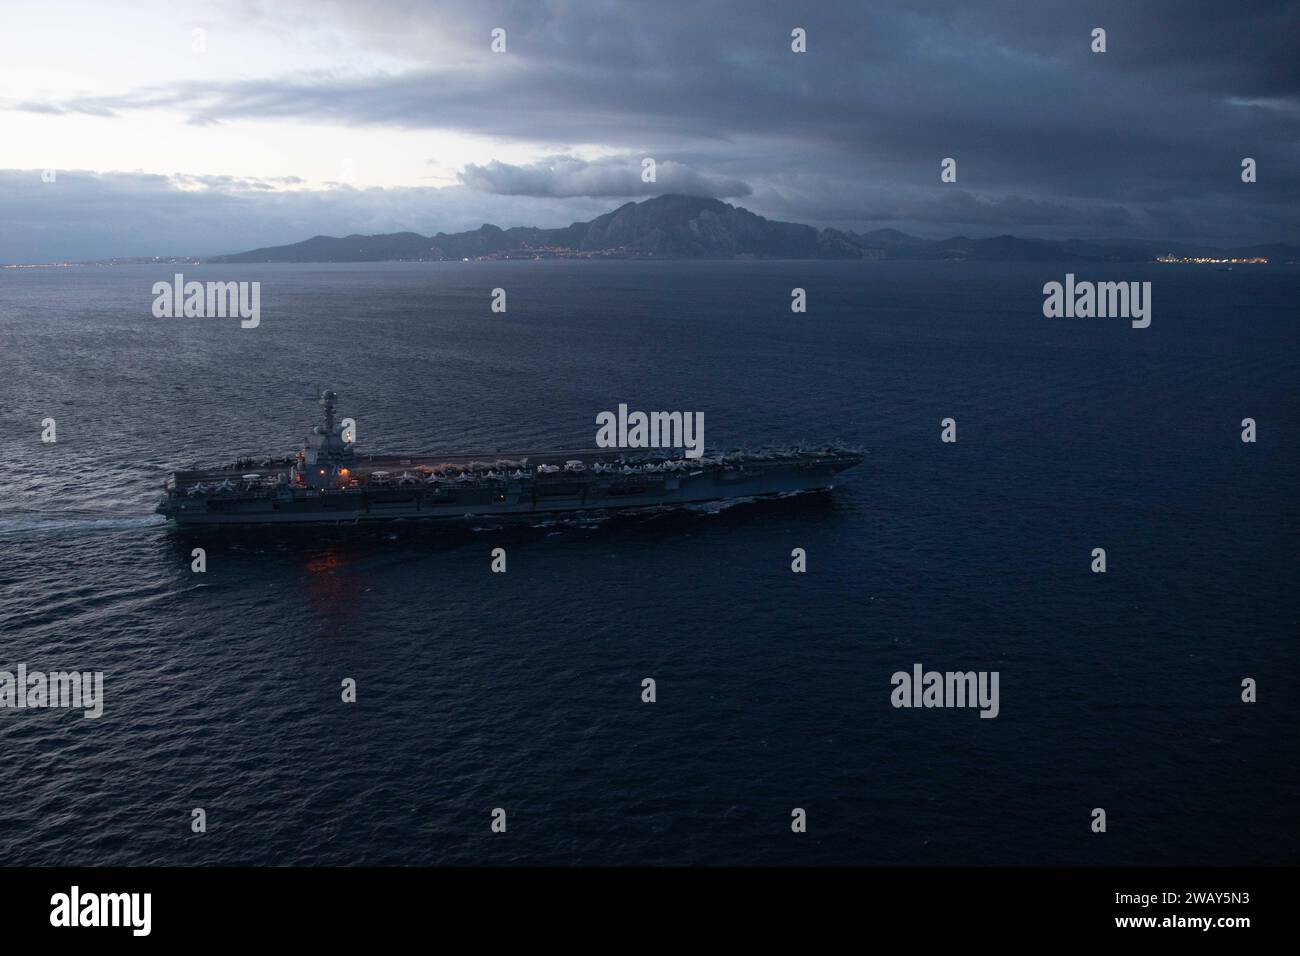 Mediterranean Sea, Spain. 05th Jan, 1617. The U.S. Navy Ford-class aircraft carrier USS Gerald R. Ford transits the Strait of Gibraltar on a stormy evening as it departs the Mediterranean Sea, January 5, 2024 off the coast of Spain. Credit: MC2 Jacob Mattingly/U.S. Navy Photo/Alamy Live News Stock Photo